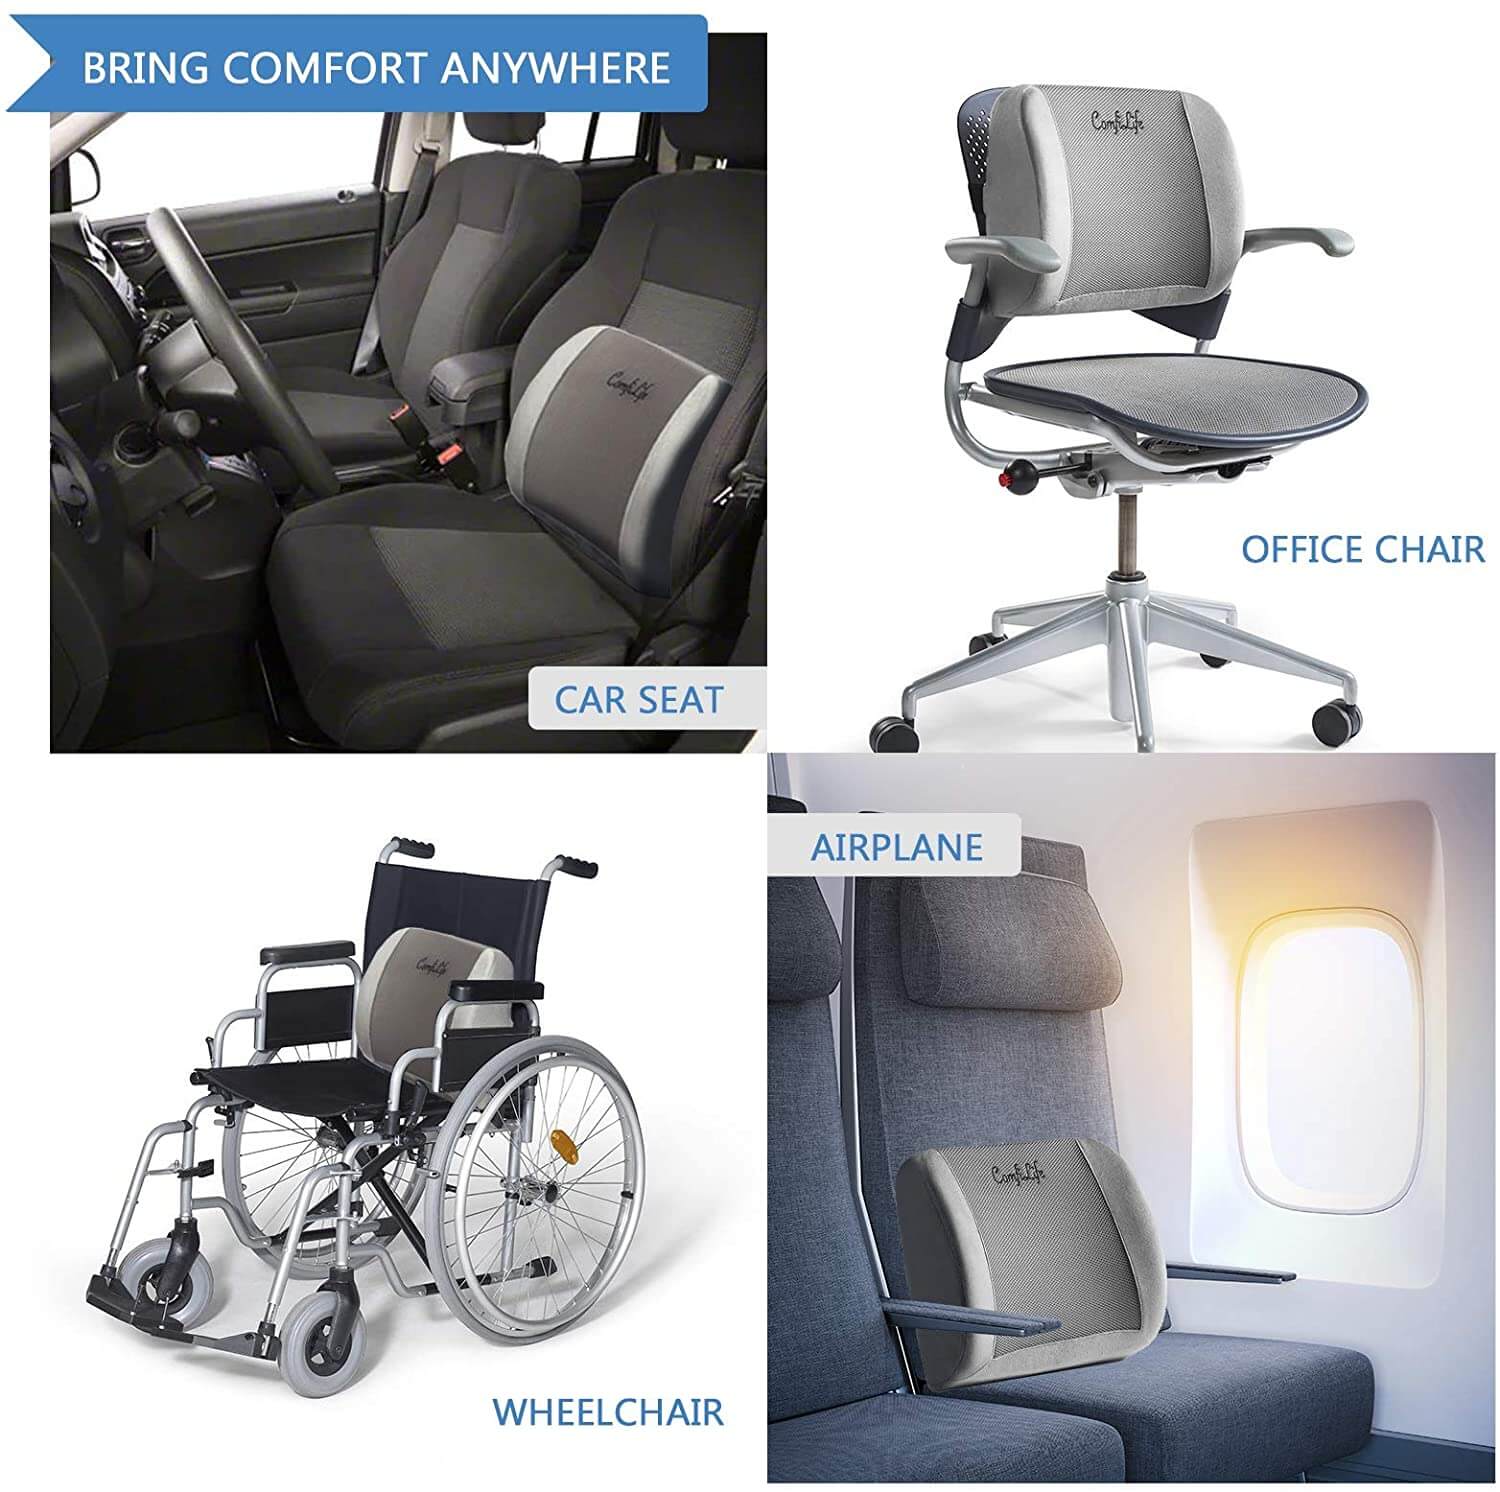 Chair Mesh Seat Orthopedic Back Comfort And Support Travel In Comfort 